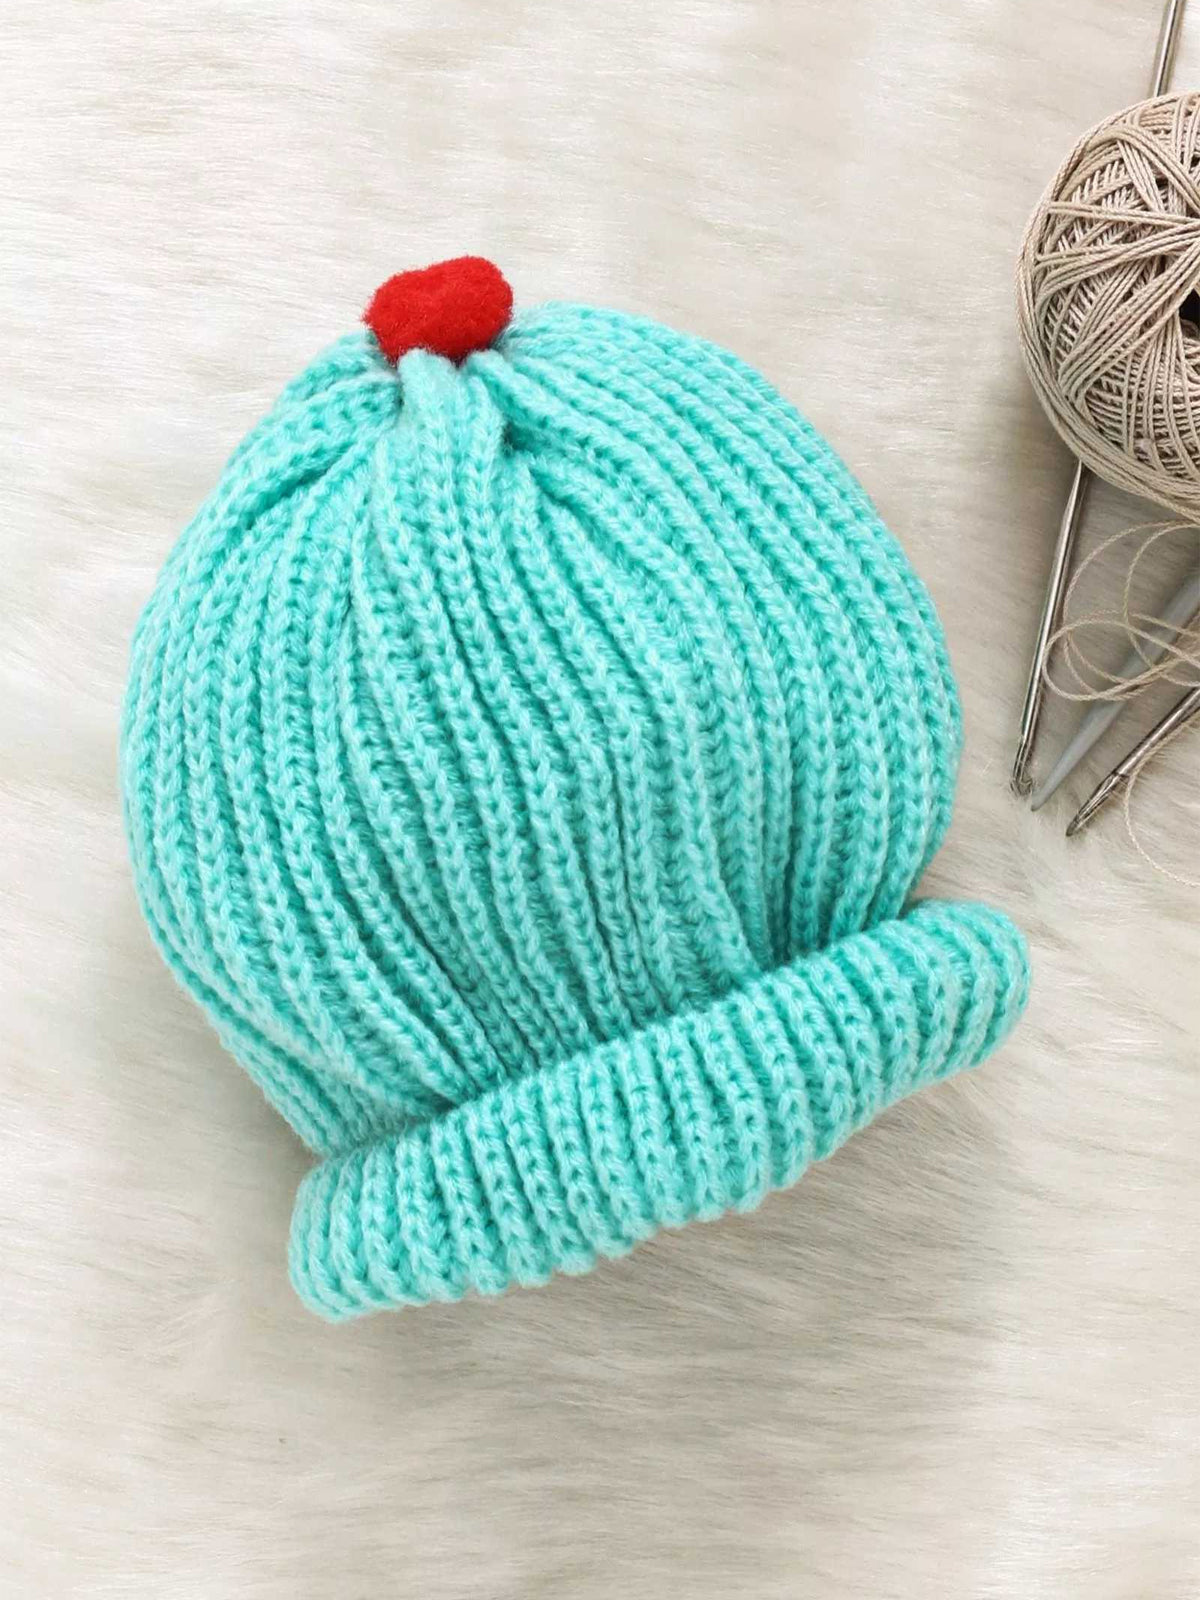 Soft and Comfortable Round Cap with Pom Pom for baby - Green color